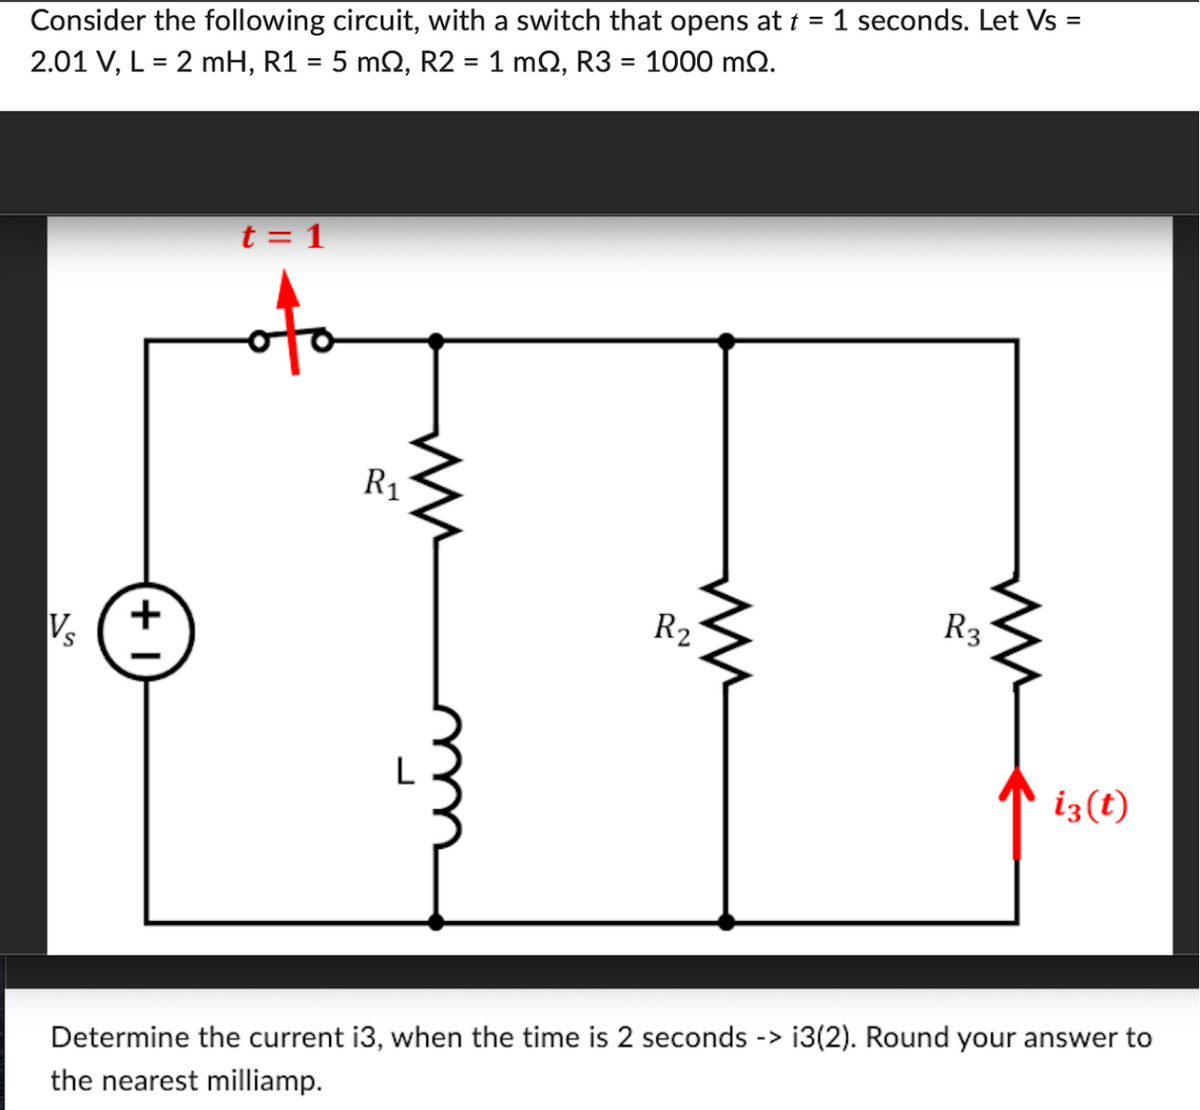 Consider the following circuit, with a switch that opens at t = 1 seconds. Let Vs =
2.01 V, L = 2 mH, R1 = 5 mQ, R2 = 1 mQ, R3 = 1000 m2.
Vs
+1
t = 1
R₁
R₂
R3
iz(t)
Determine the current i3, when the time is 2 seconds -> i3(2). Round your answer to
the nearest milliamp.